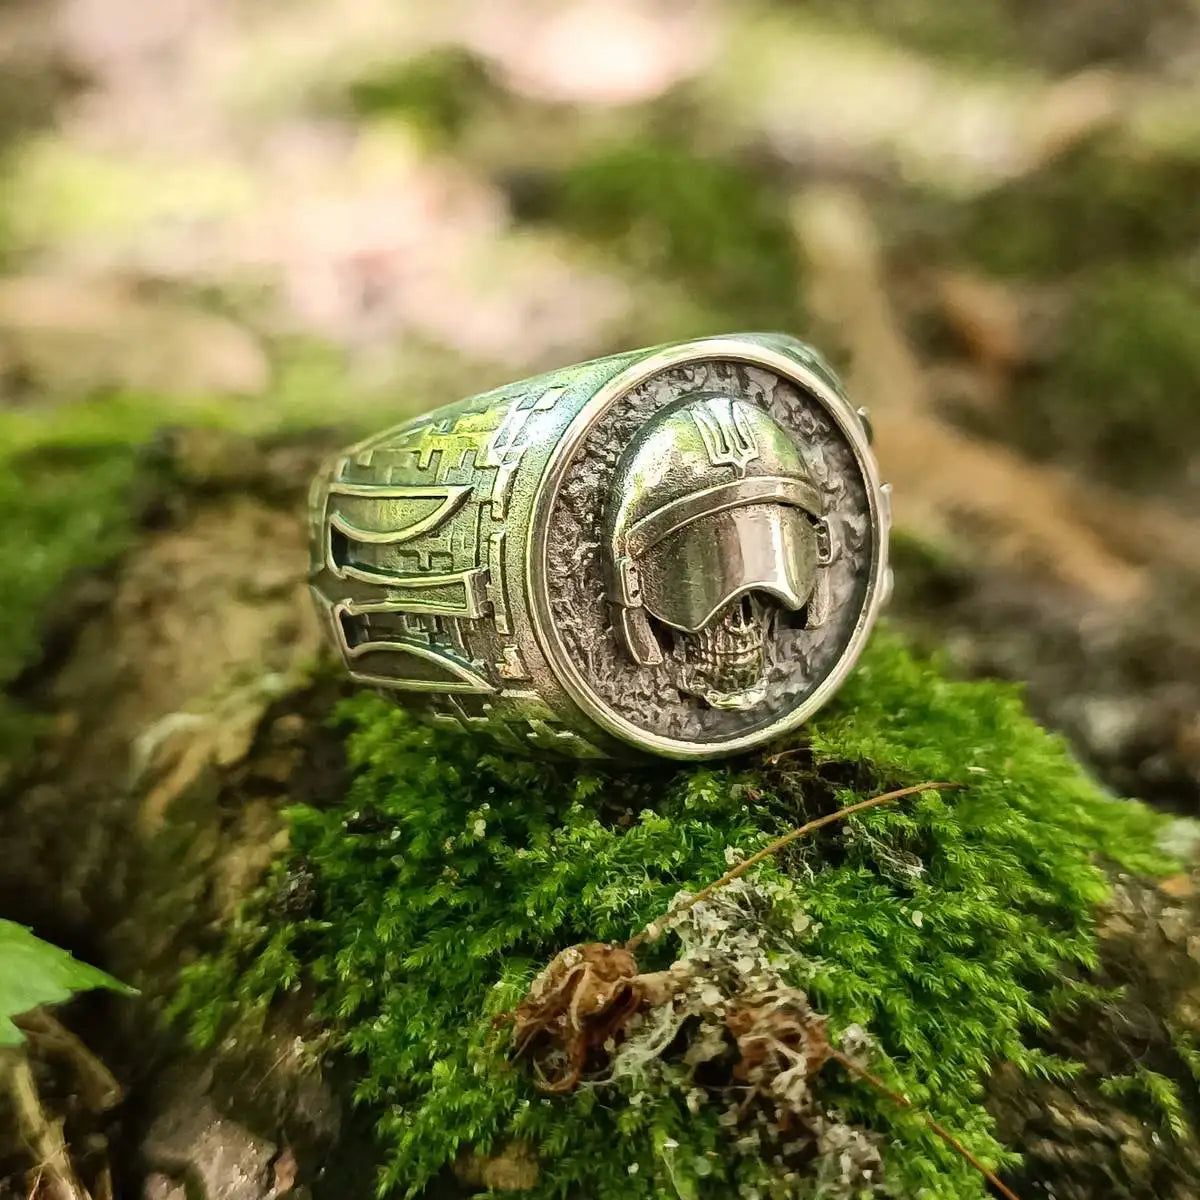 The Ghost of Kyiv silver ring